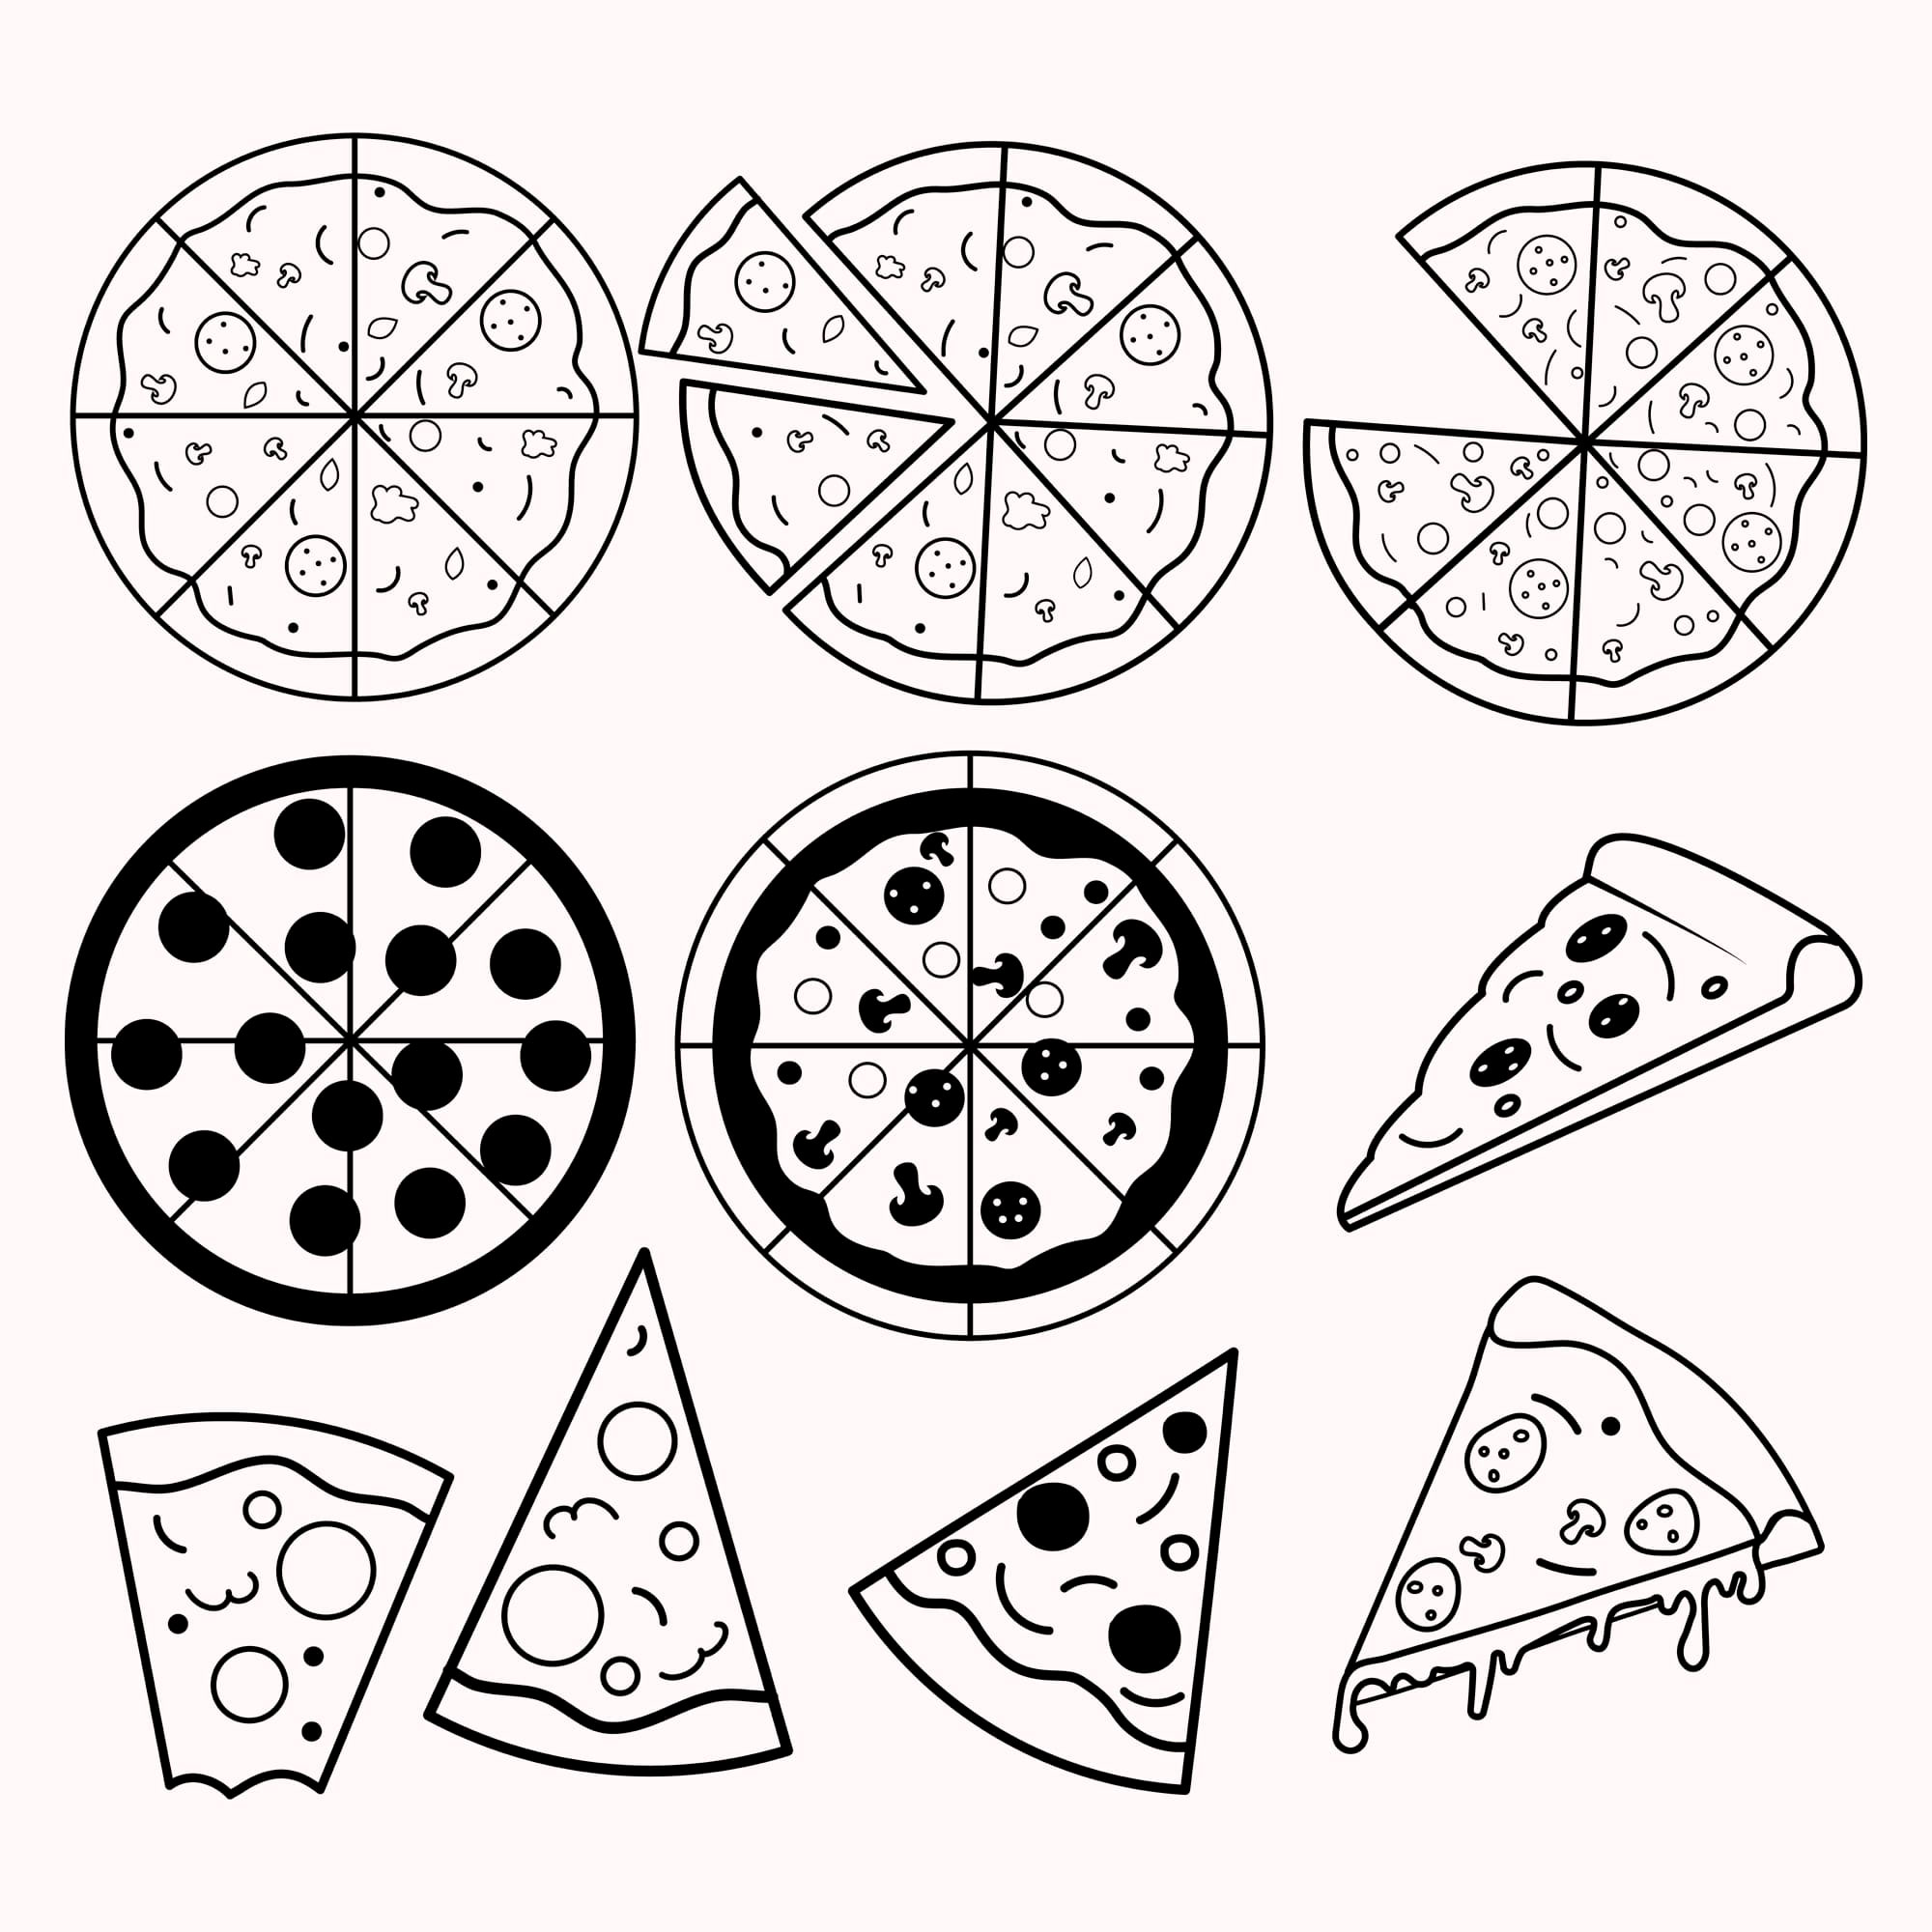 A whole pizza and slices of pizza are drawn on a white background.